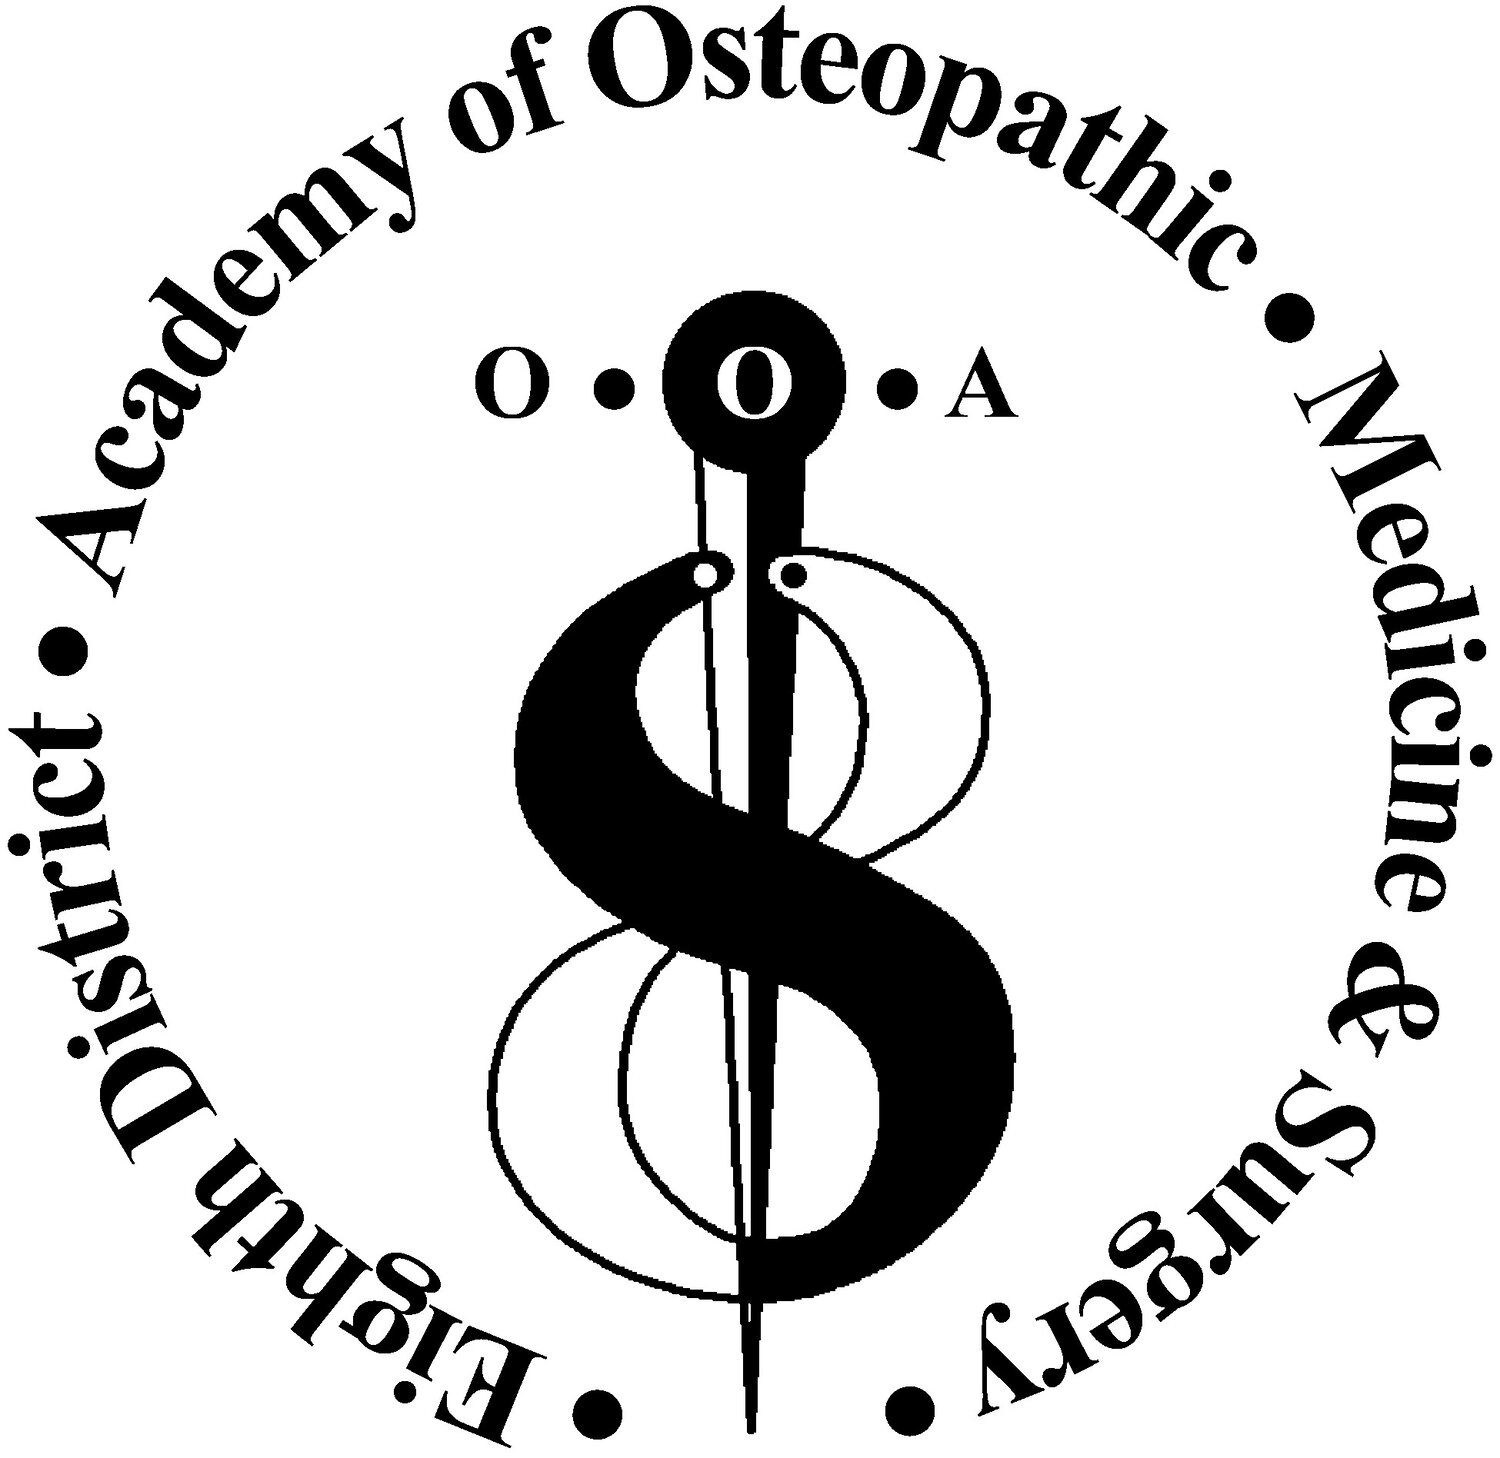 Eighth District Academy of Osteopathic Medicine &amp; Surgery